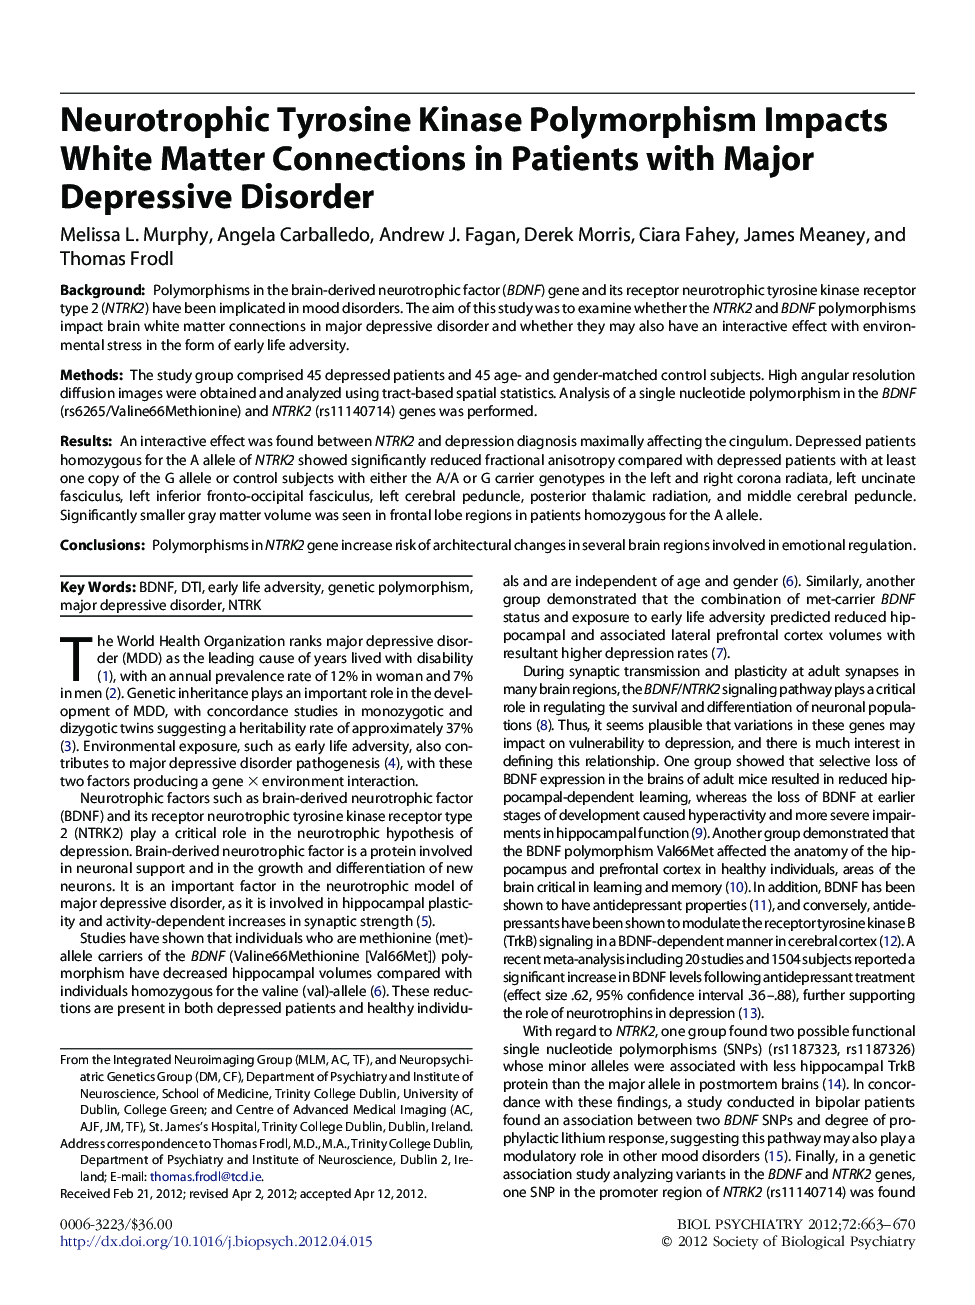 Neurotrophic Tyrosine Kinase Polymorphism Impacts White Matter Connections in Patients with Major Depressive Disorder